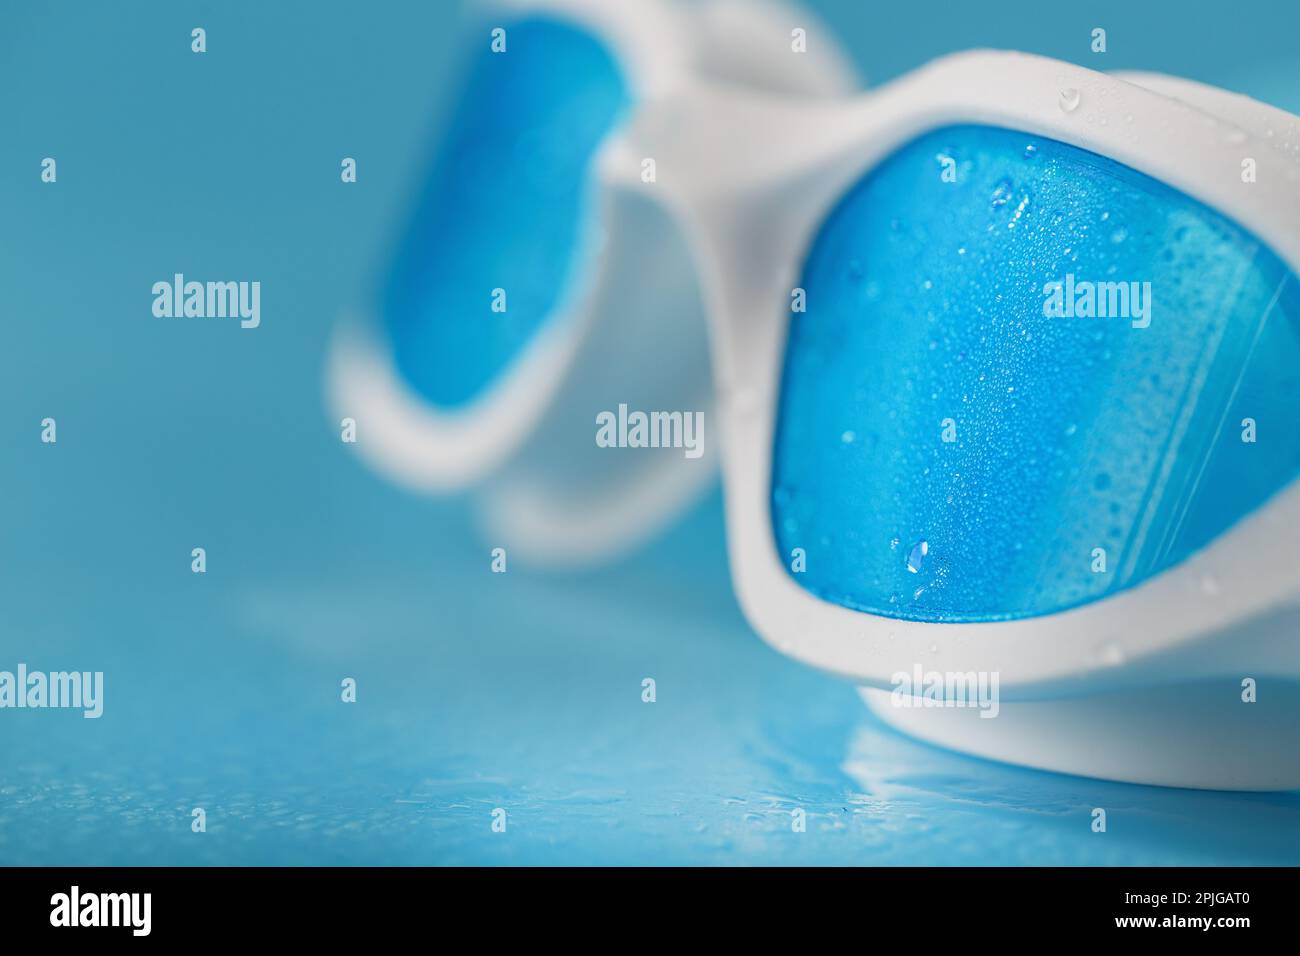 White swimming glasses with a blue lens on a blue background Stock Photo